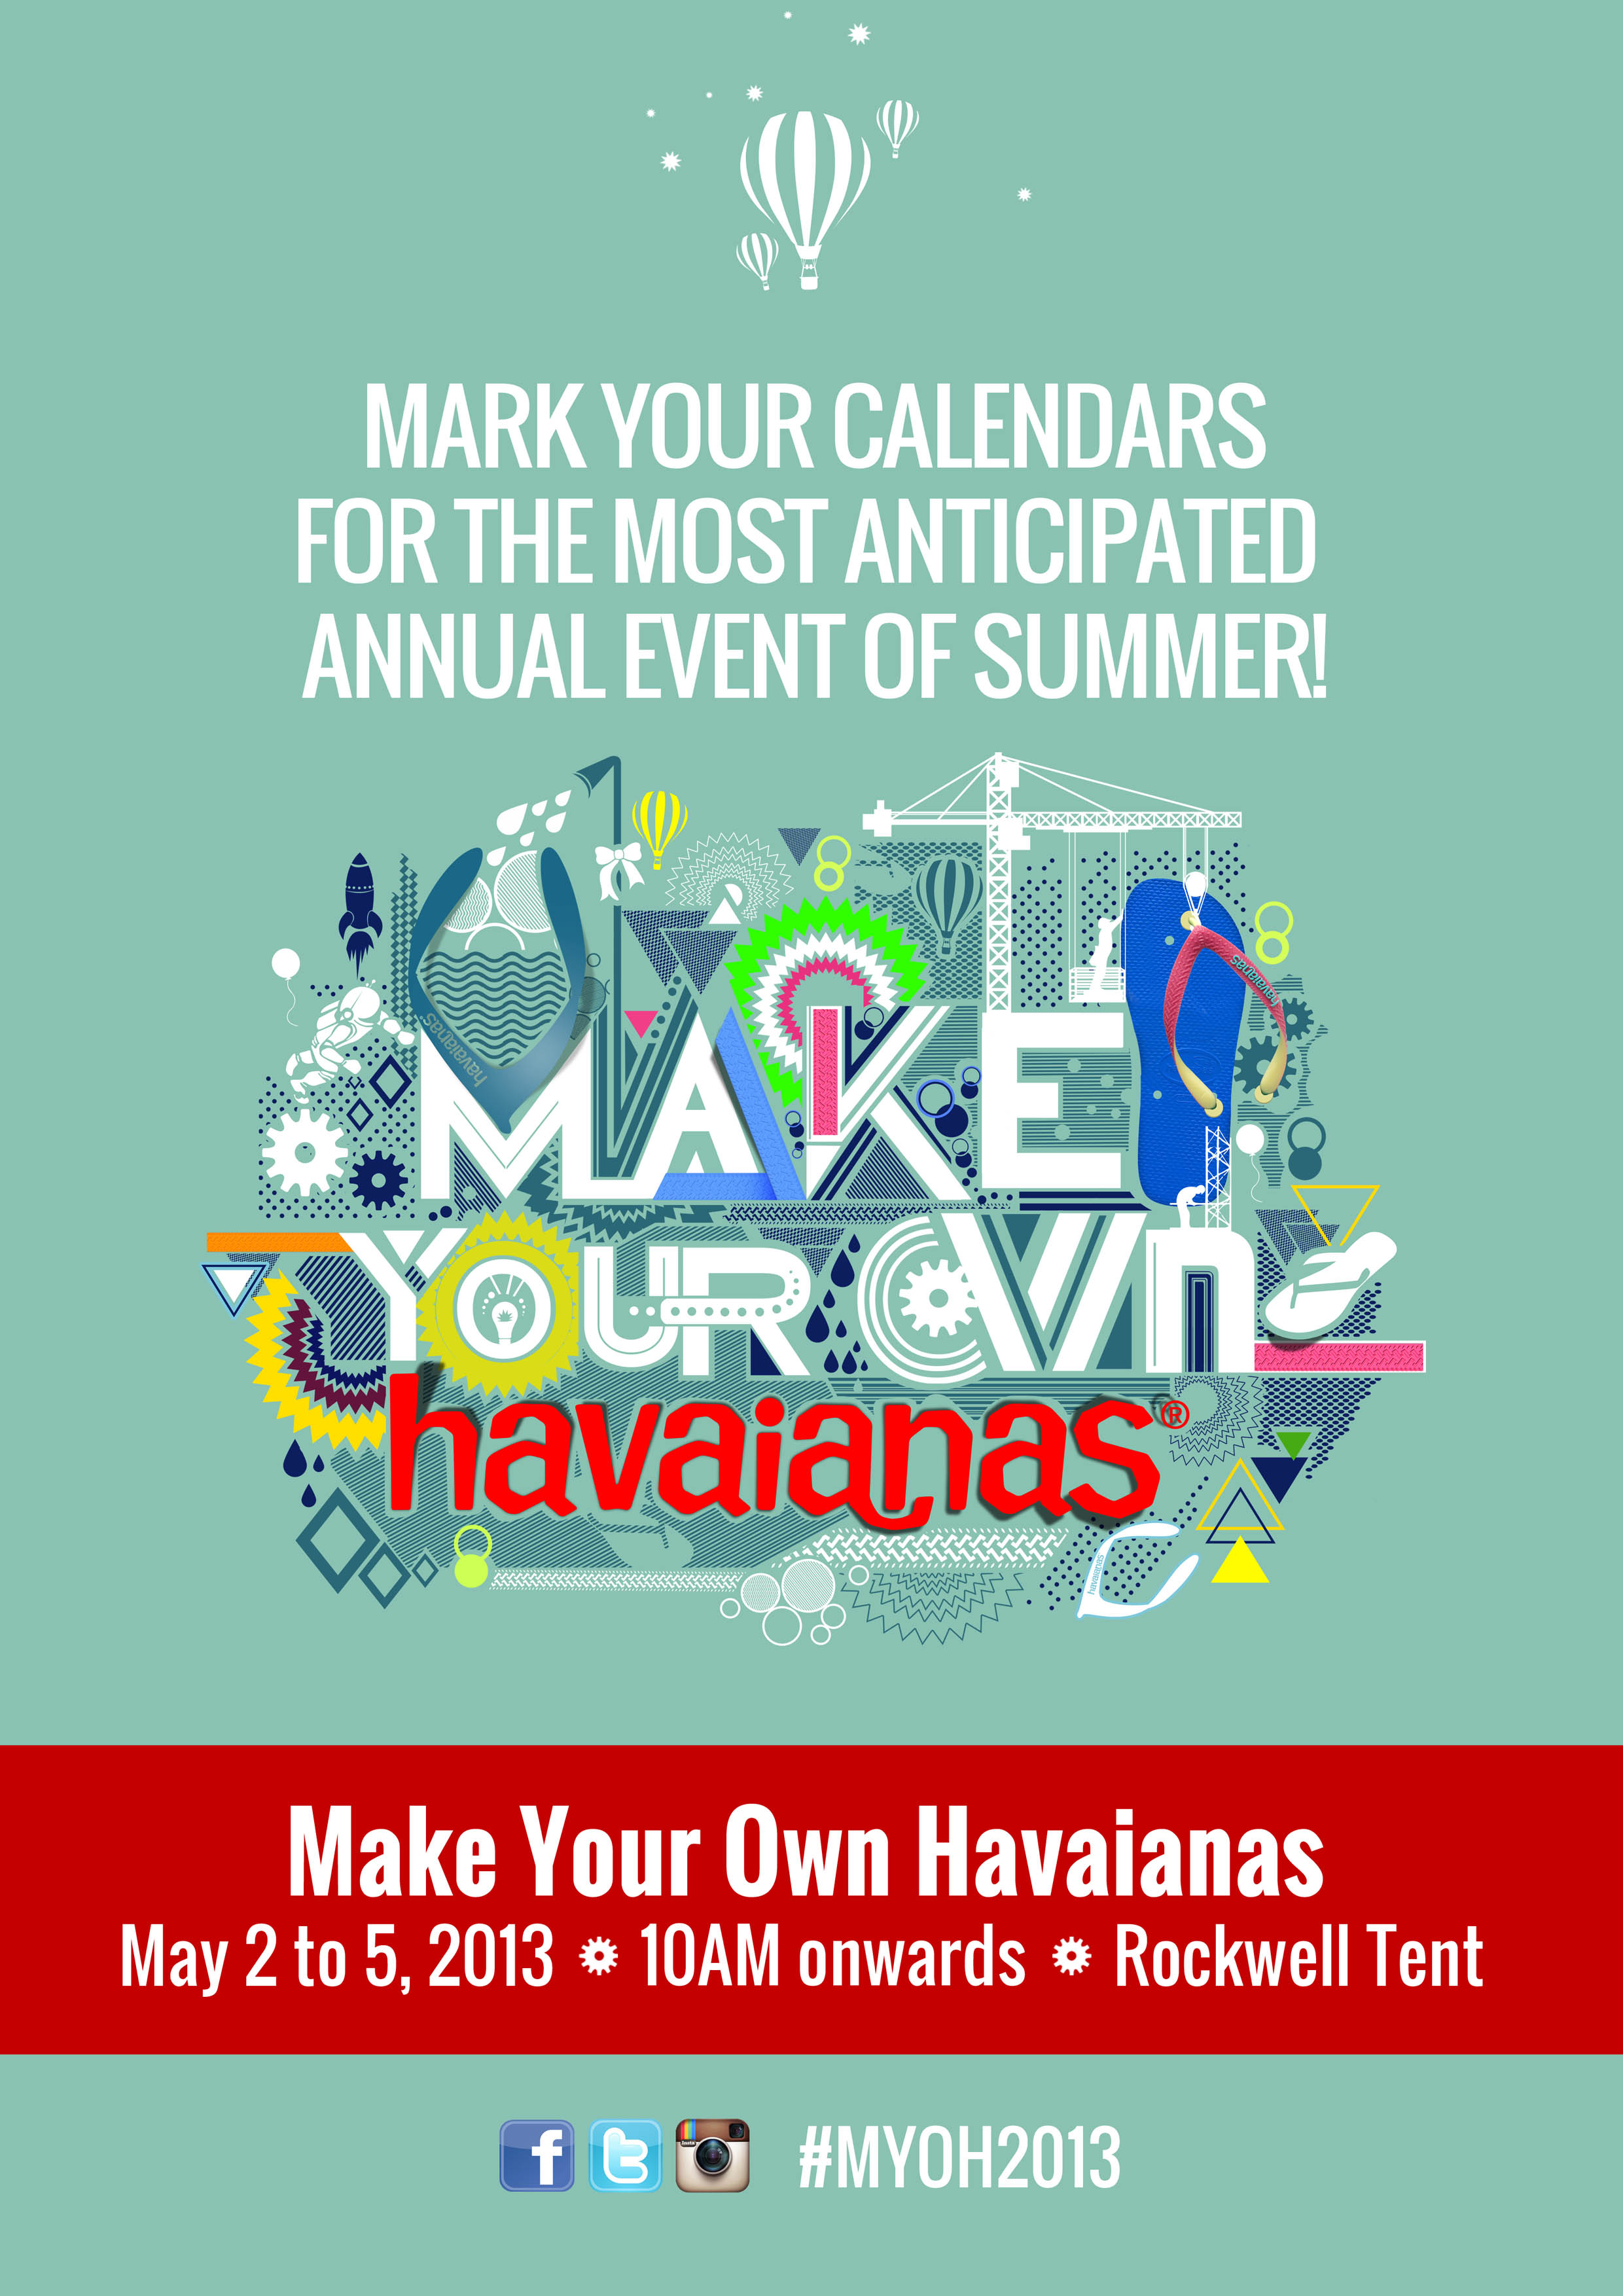 Make Your Own Havianas MYOH event at Rockwell Tent Makati